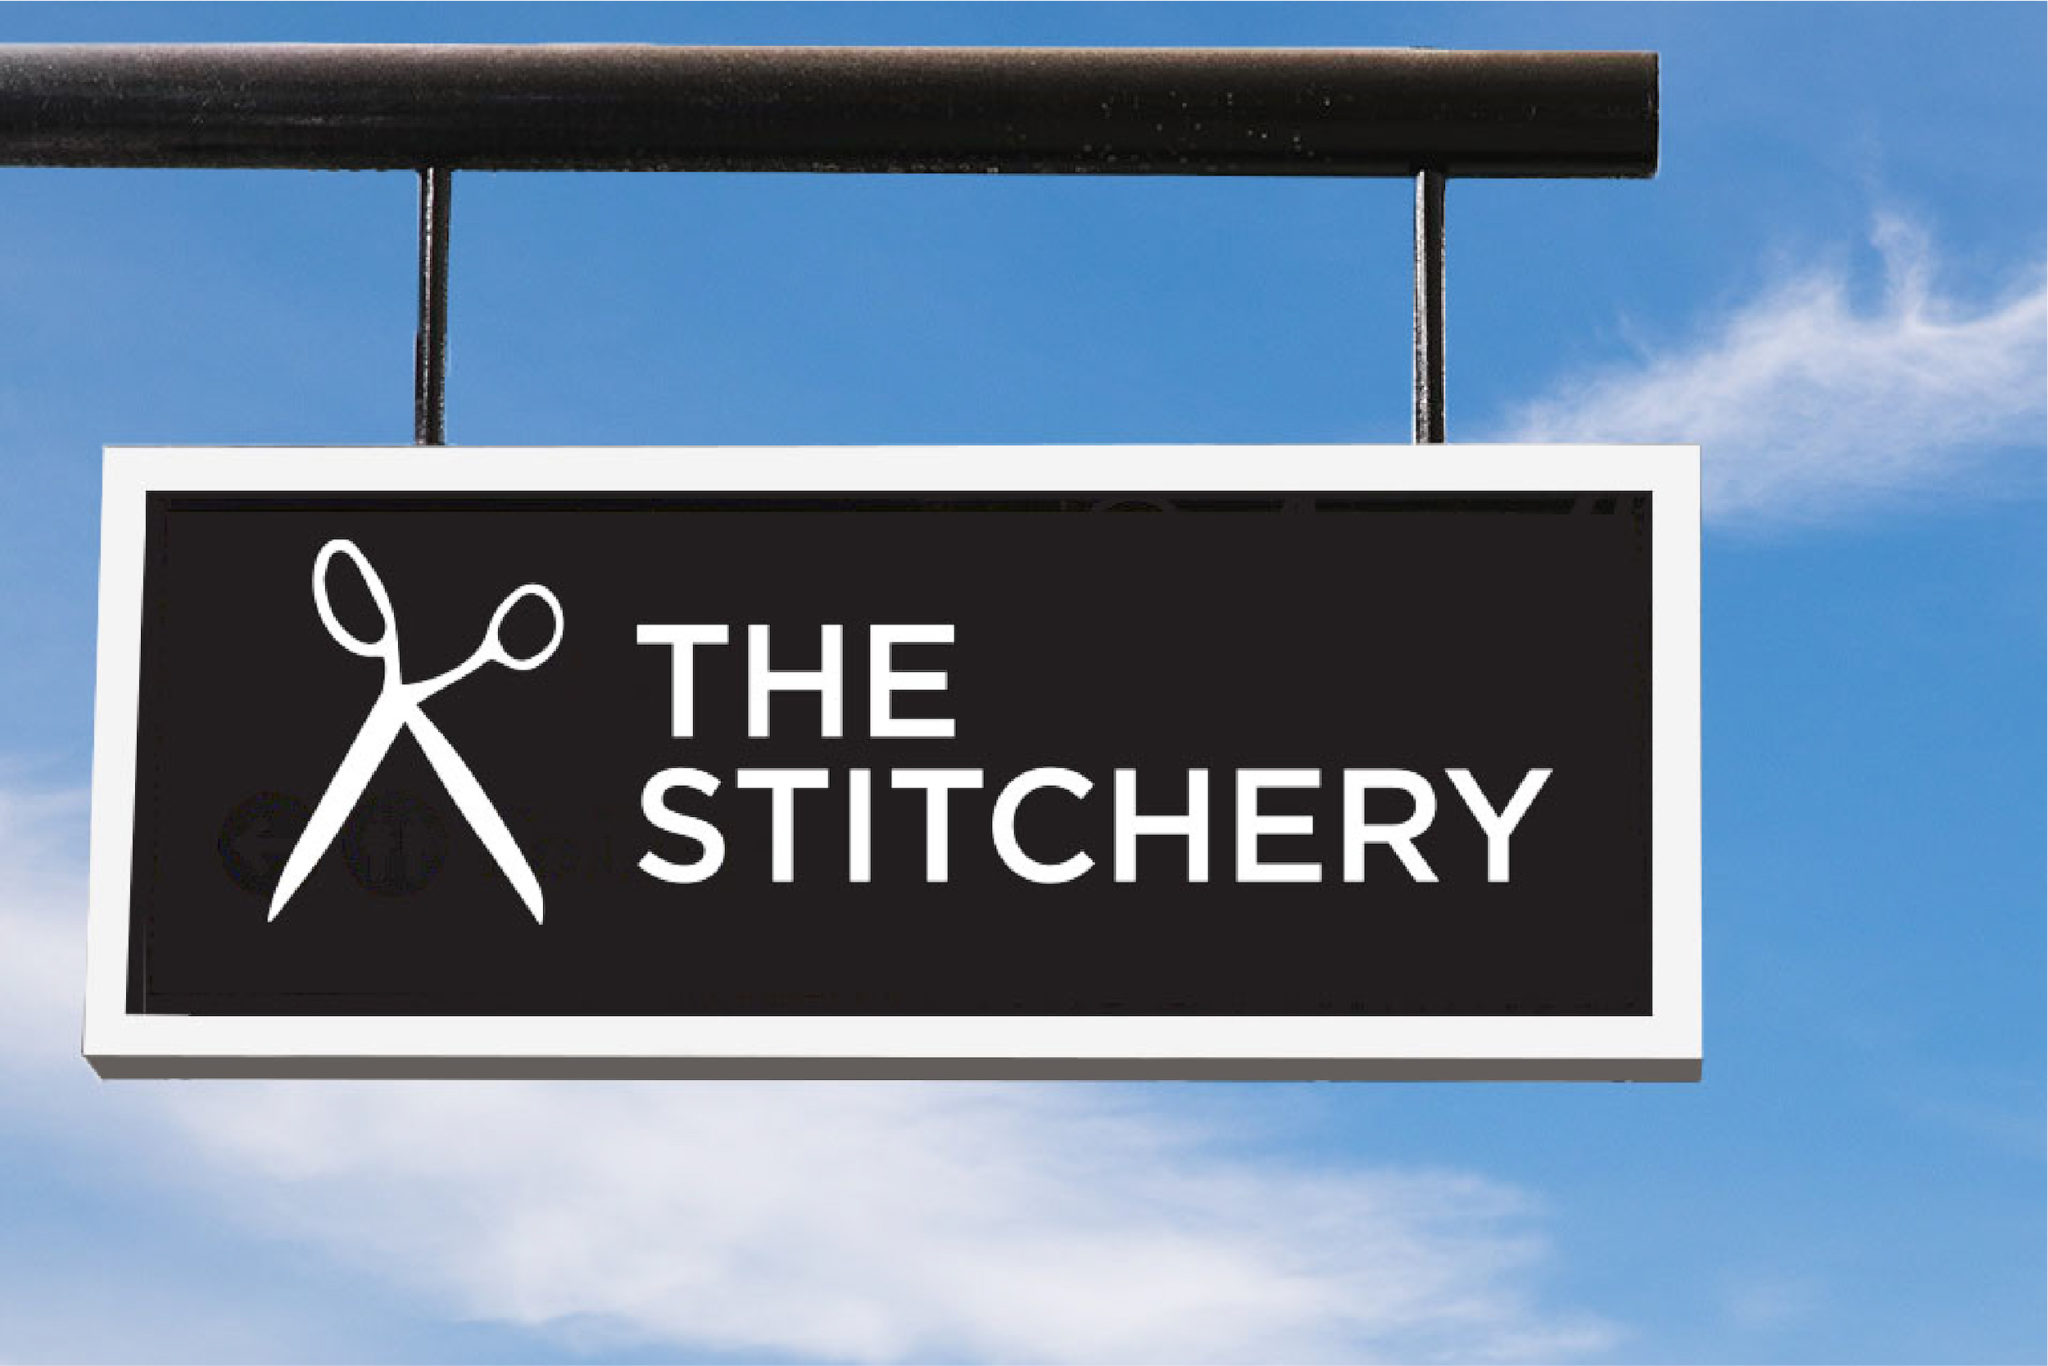 The Stitchery exterior hanging sign, created by Šek Design Studio